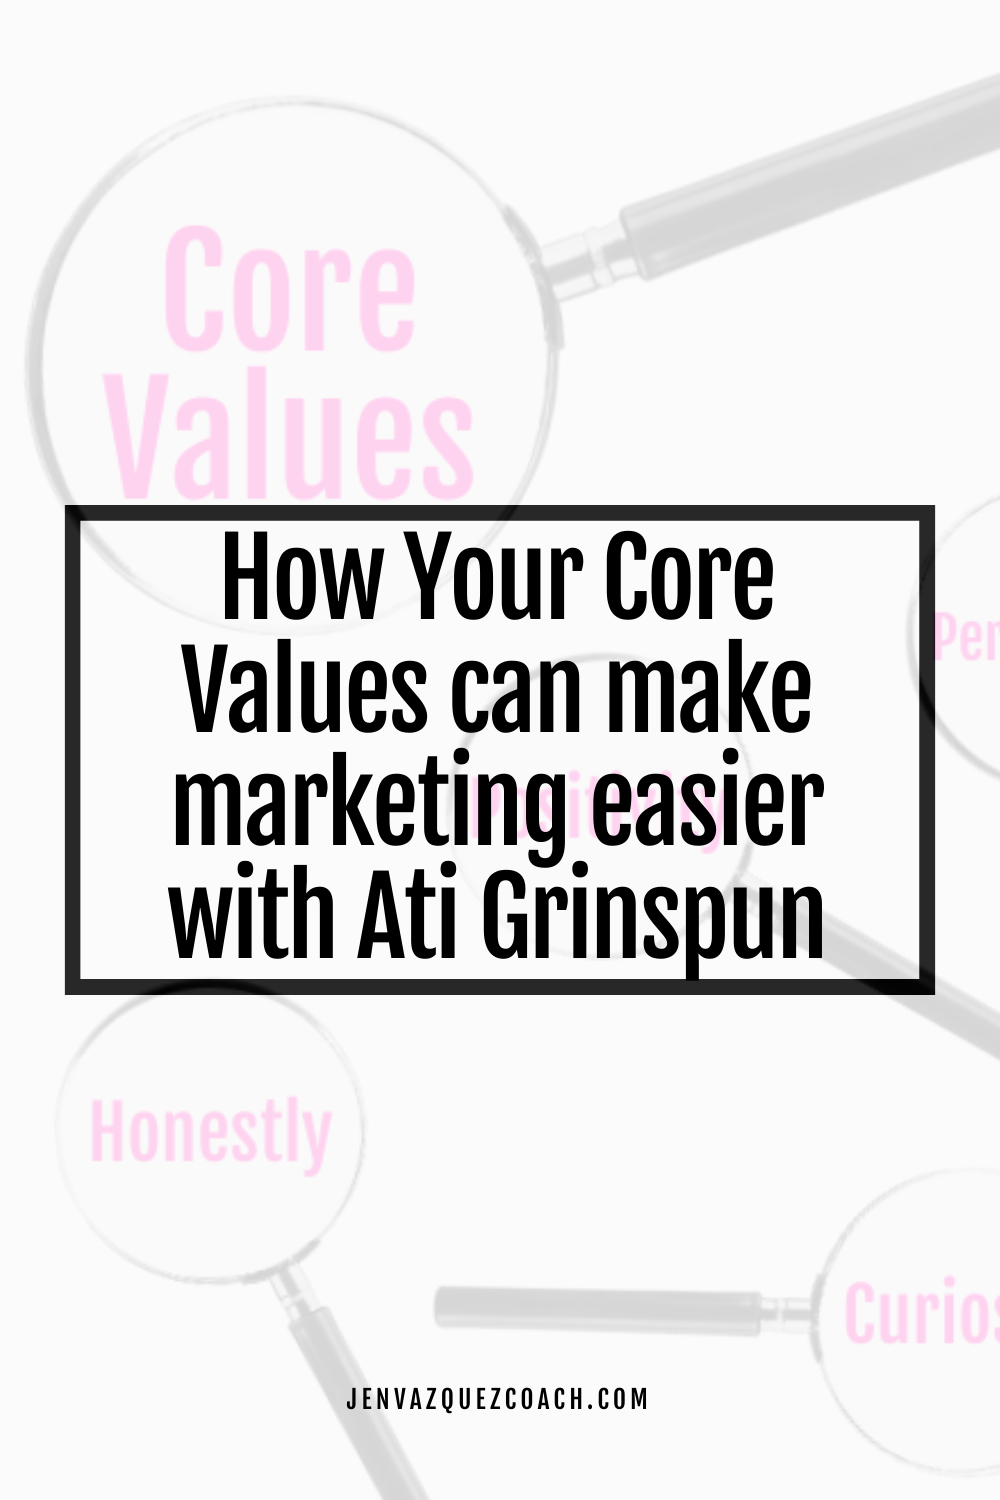 How Your Core Values can make marketing easier with Ati Grinspun